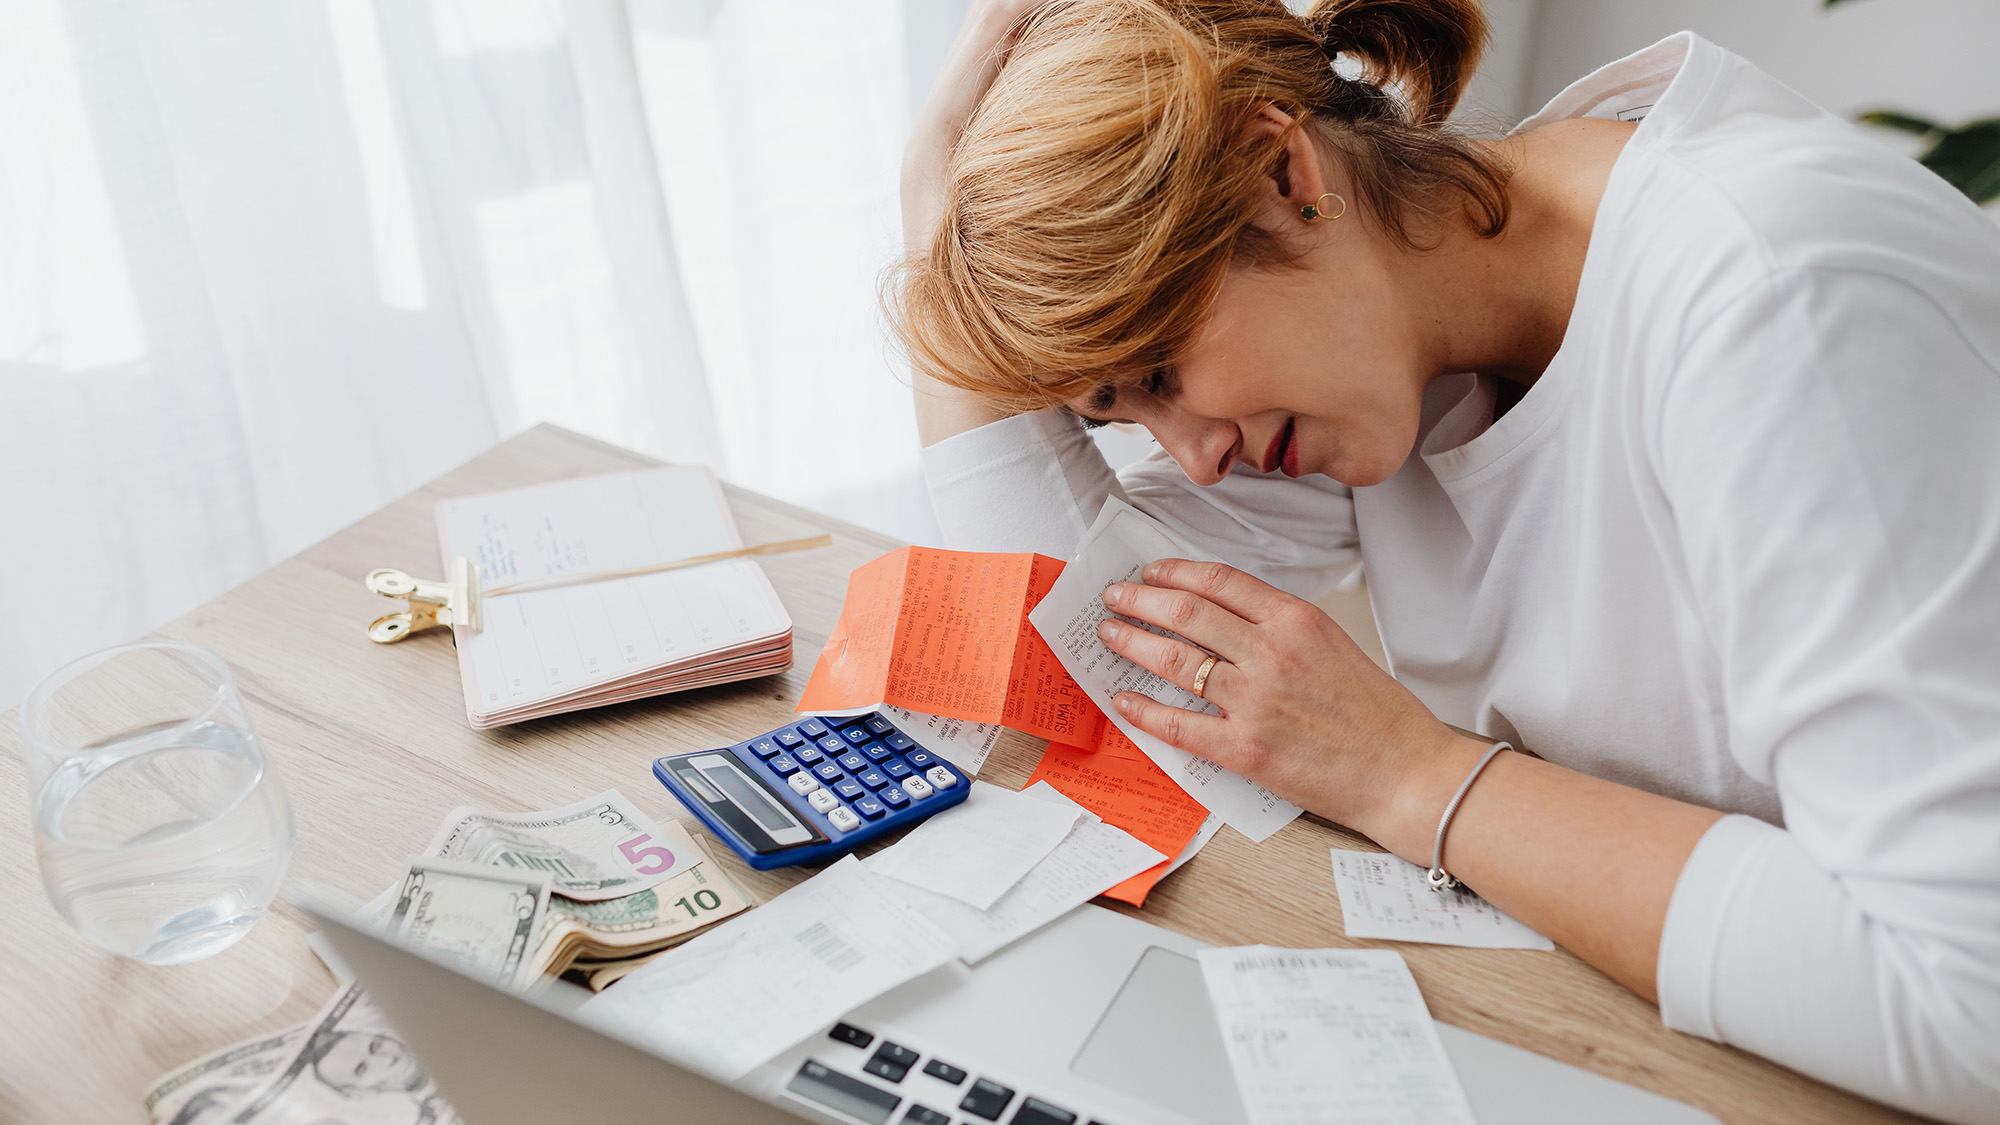 5 ways to deal with financial anxiety before it seriously harms your health